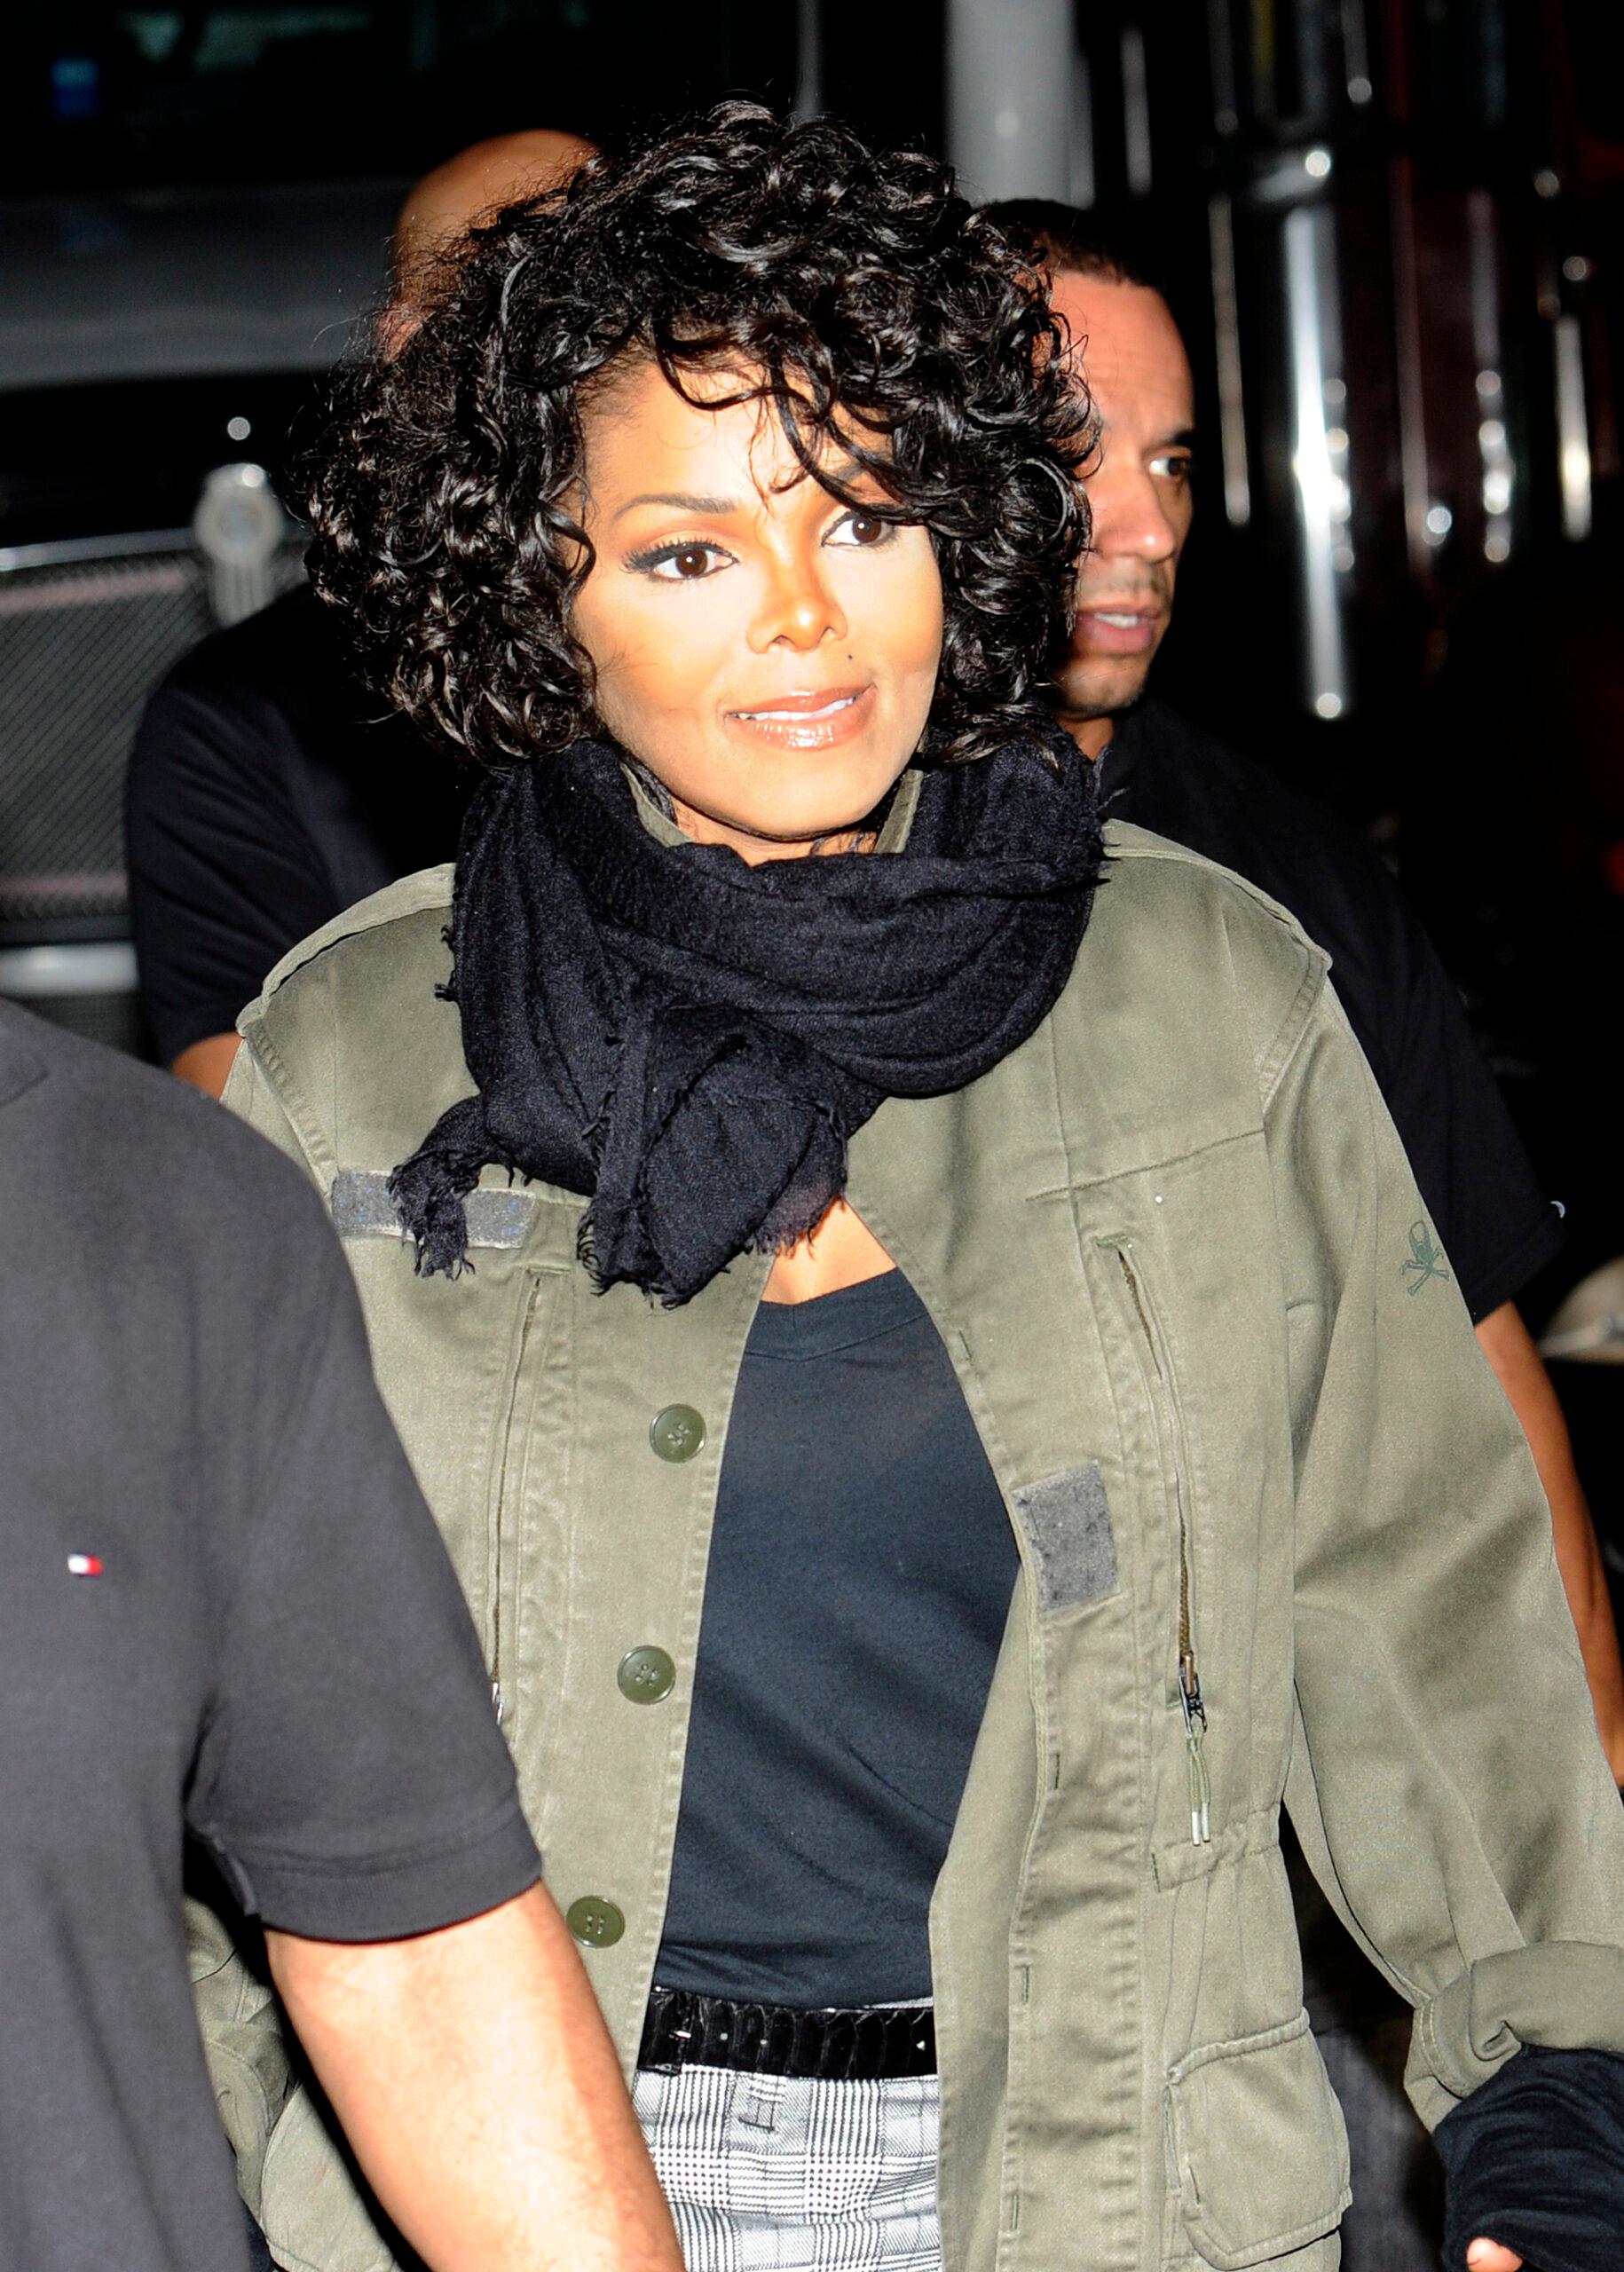 Singer Janet Jackson is seen after the last show of her tour at Fillmore Miami Beach